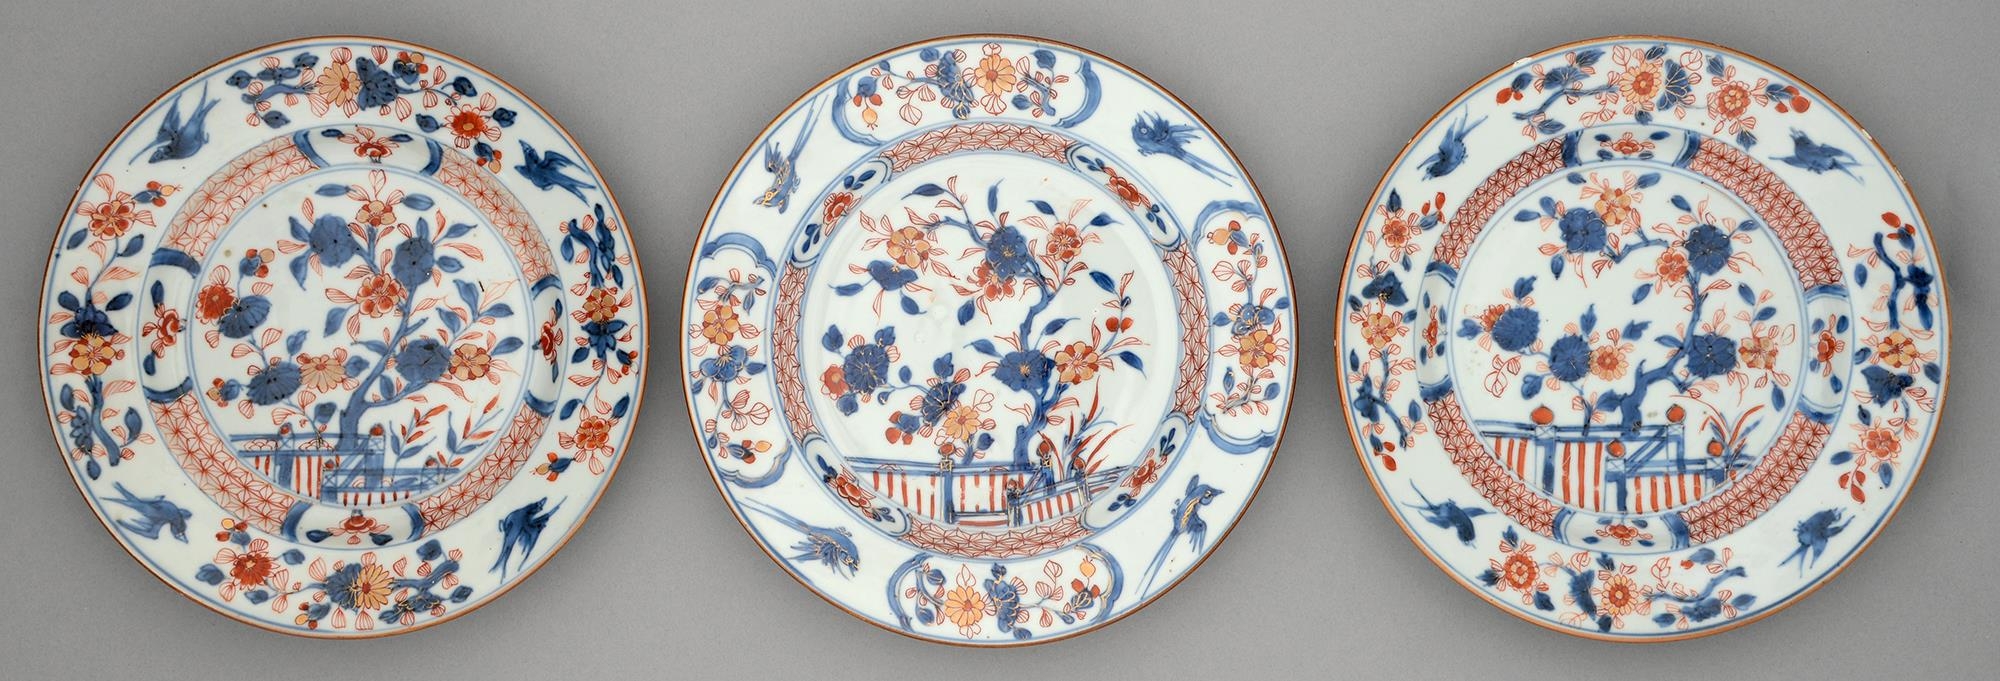 Three Chinese Imari plates, 18th c, painted with a blossoming tree and fence in panelled diaper